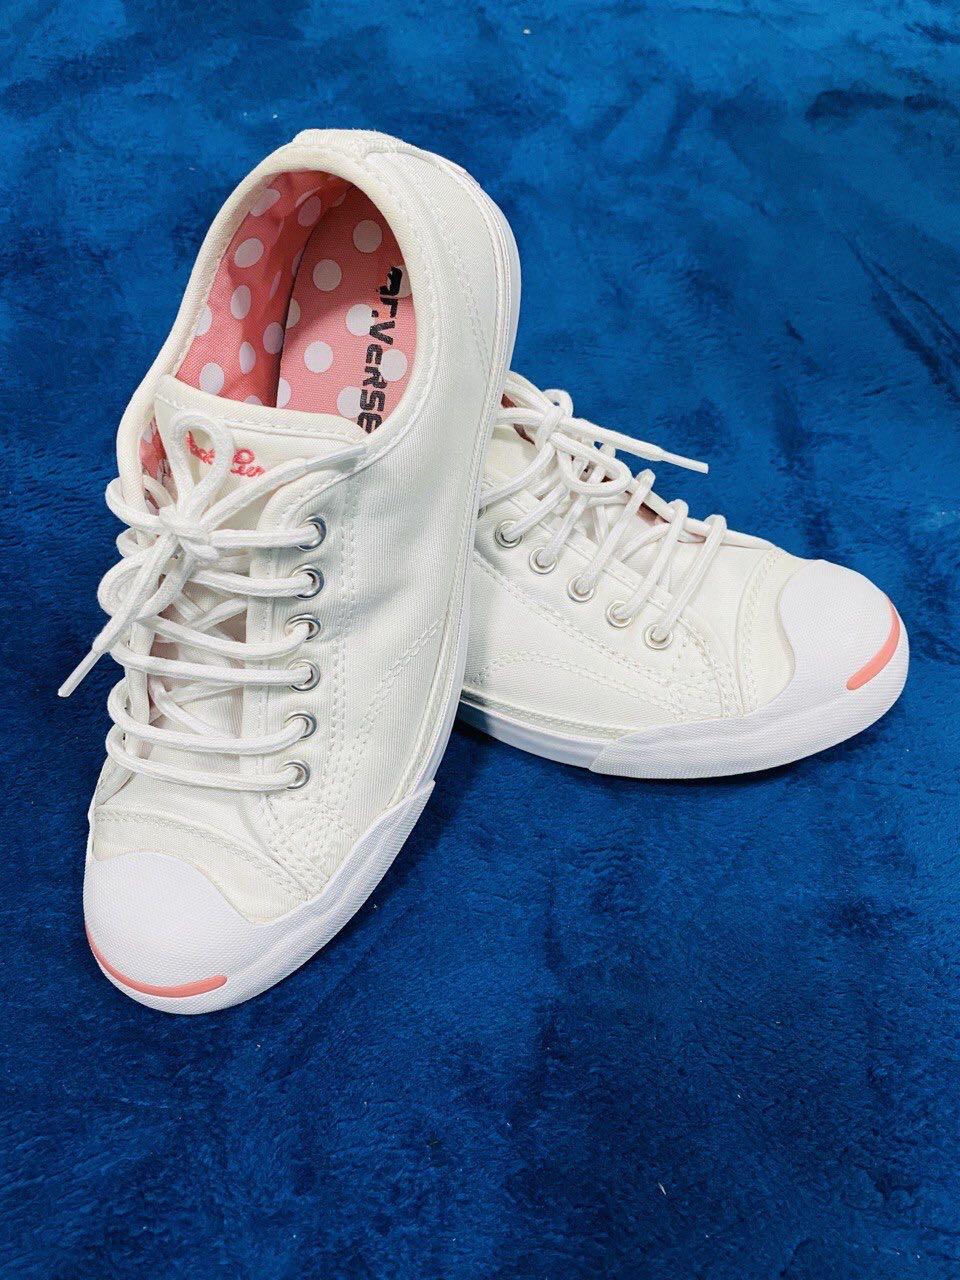 converse jack purcell 5.5